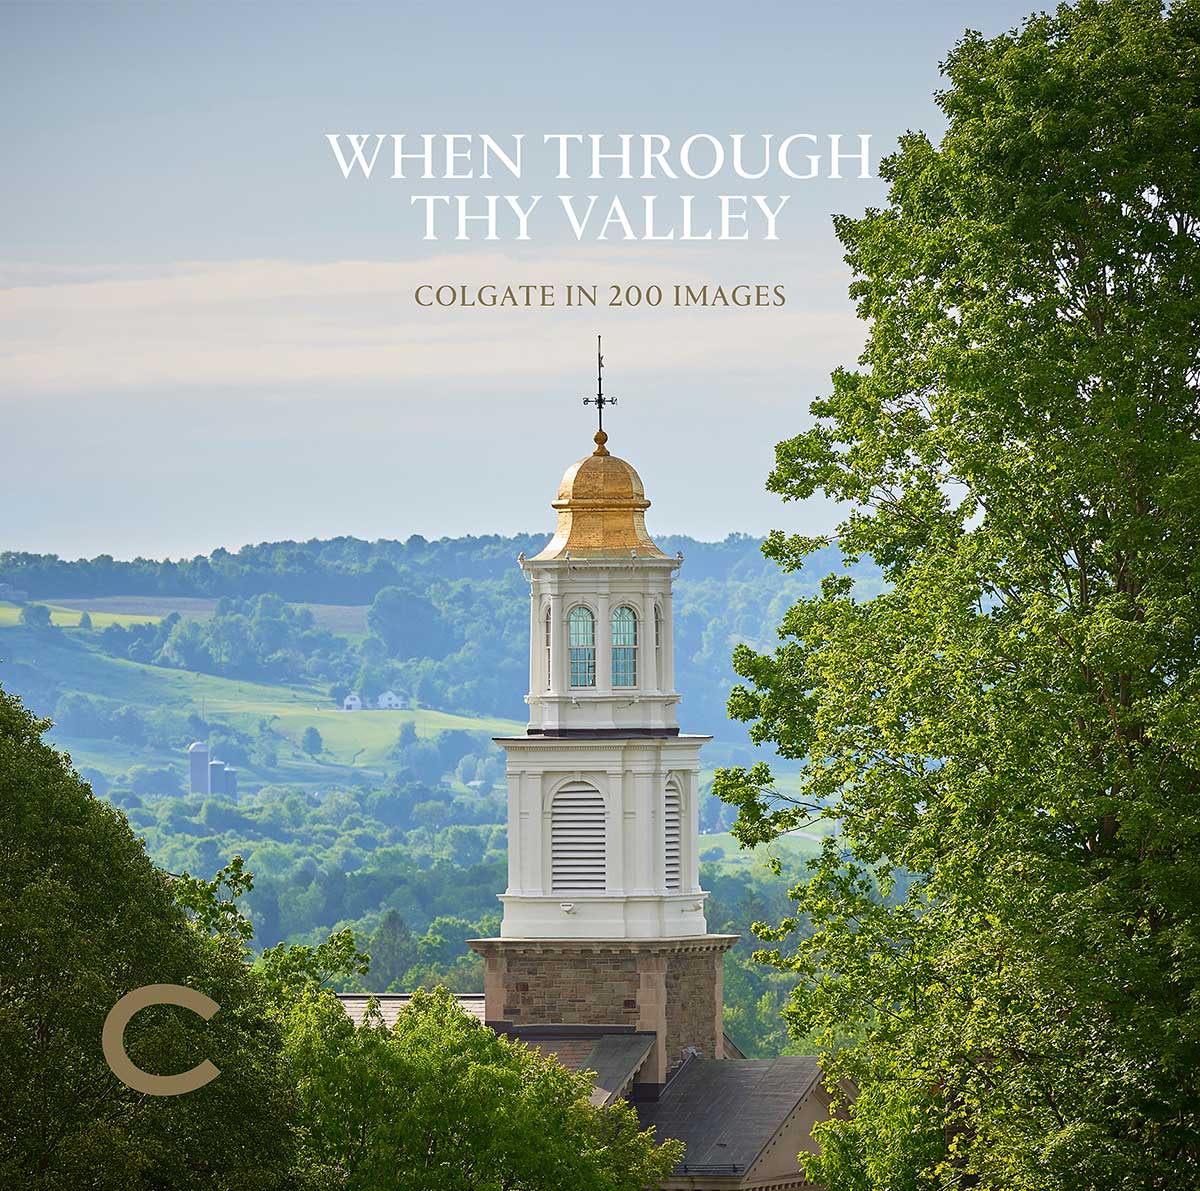 Cover of the book When Through Thy Valley, featuring the Colgate Memorial Chapel's cupola against the Chenango Valley in the background